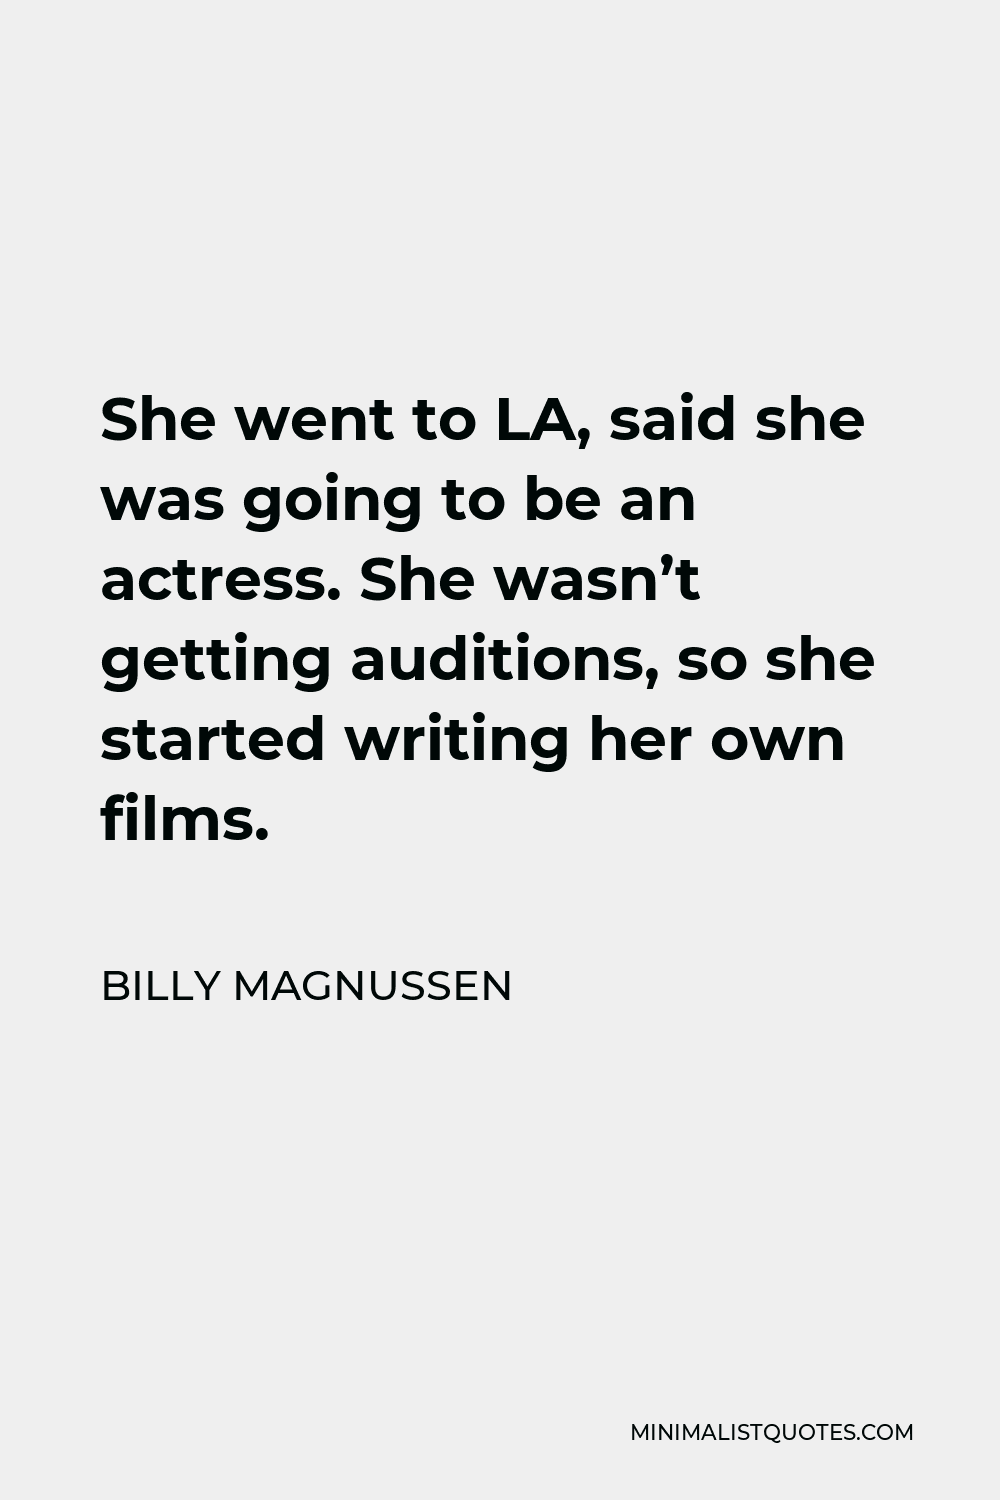 Billy Magnussen Quote - She went to LA, said she was going to be an actress. She wasn’t getting auditions, so she started writing her own films.